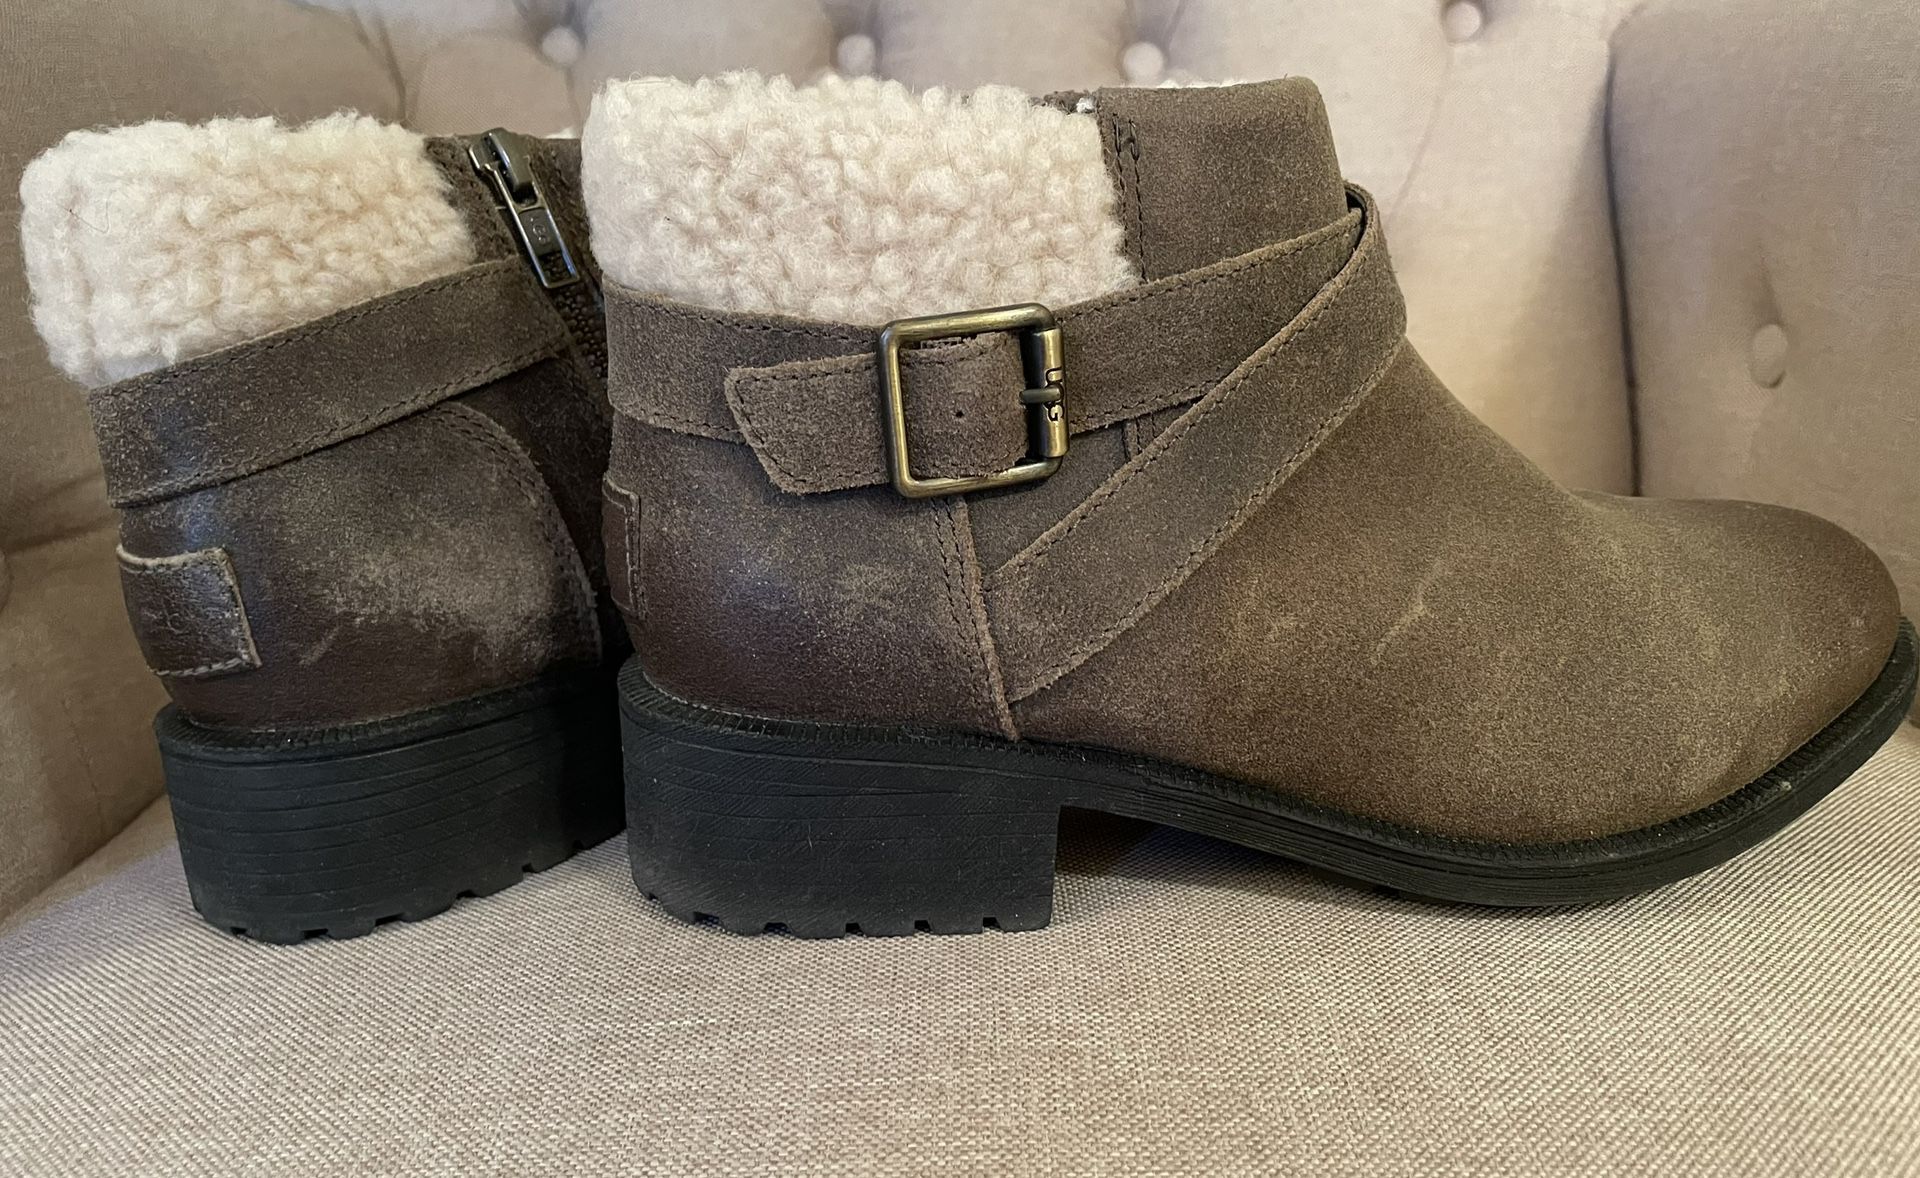 UGG Benson Ankle Boots, Women’s Size 6.5, Excellent Condition, $160